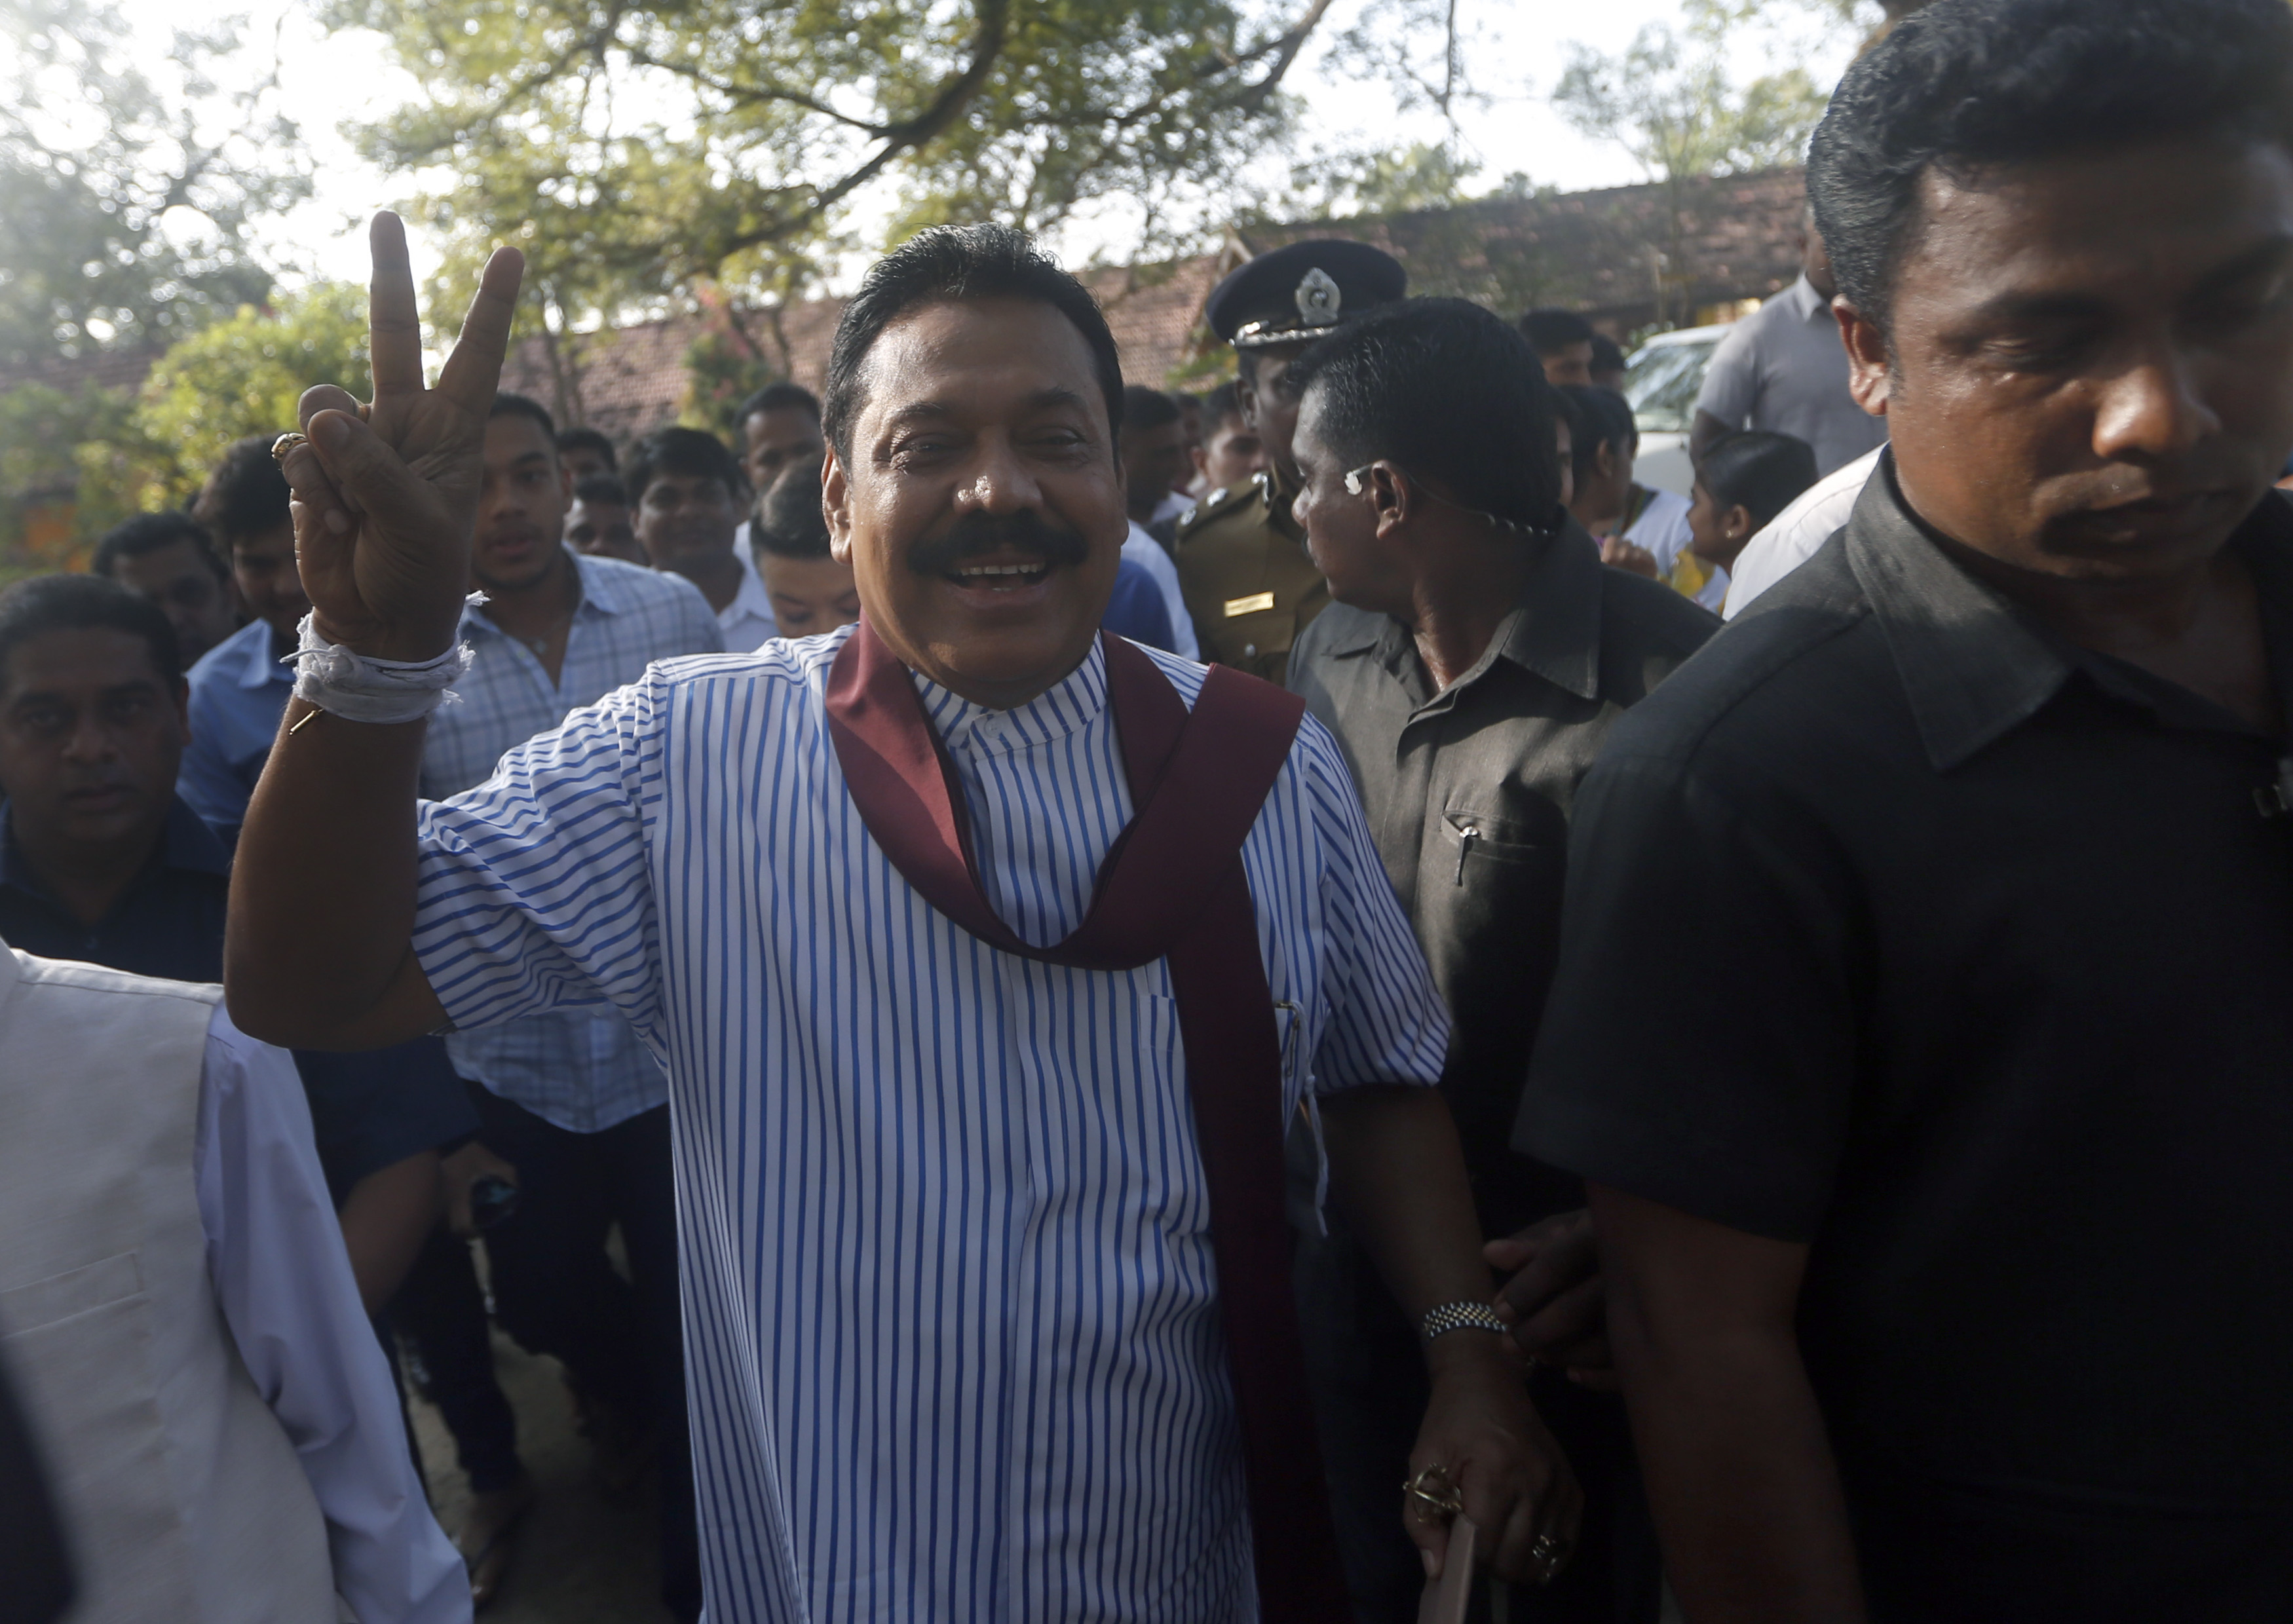 Sri Lanka's President Mahinda Rajapaksa gestures to the media after casting his vote for the presidential election, in Medamulana